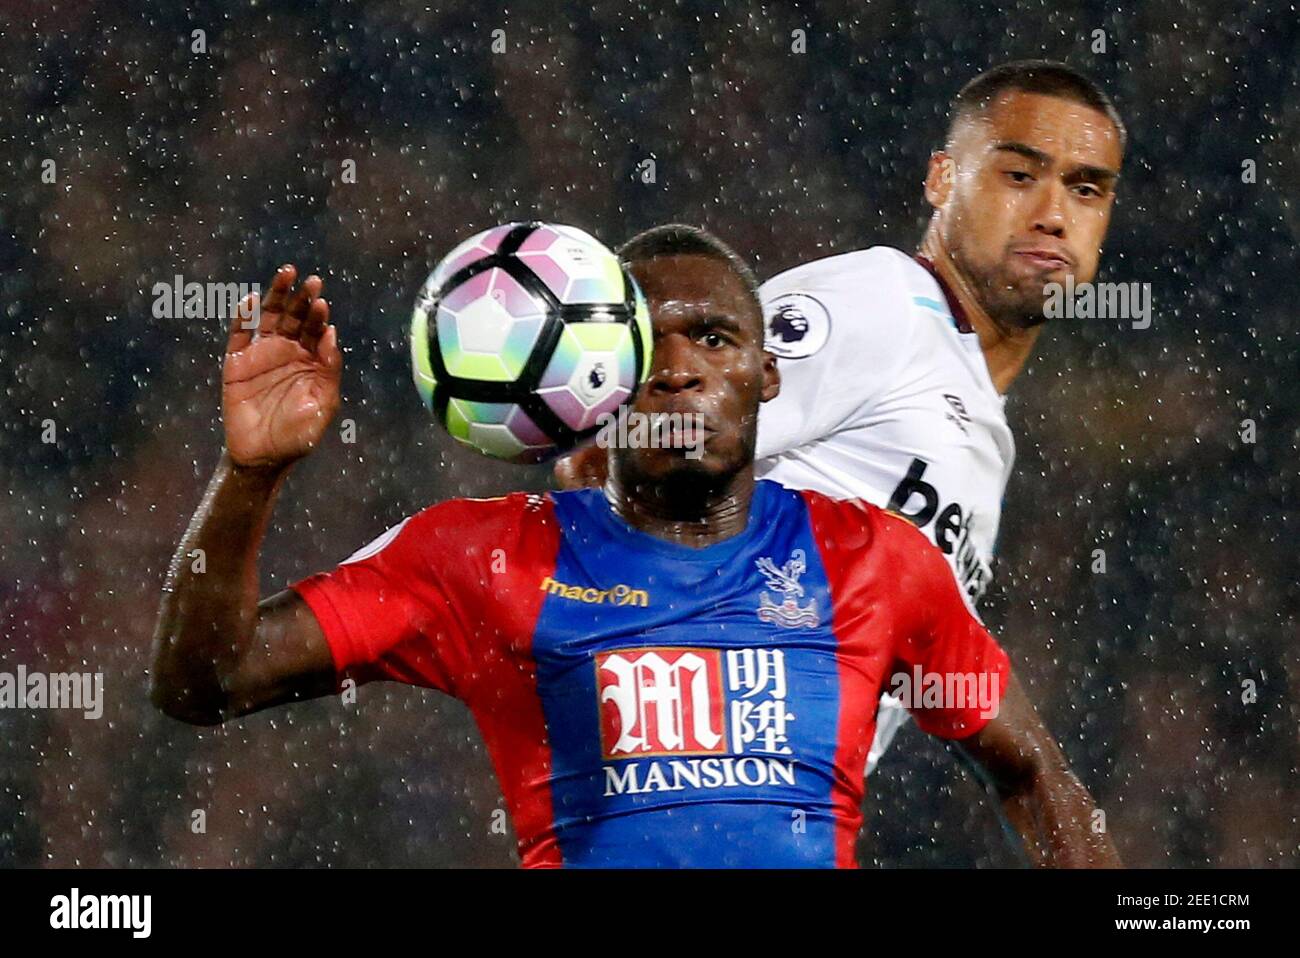 Britain Football Soccer - Crystal Palace v West Ham United - Premier League - Selhurst Park - 15/10/16 Crystal Palace's Christian Benteke  in action with West Ham United's Winston Reid Reuters / Paul Hackett Livepic EDITORIAL USE ONLY. No use with unauthorized audio, video, data, fixture lists, club/league logos or 'live' services. Online in-match use limited to 45 images, no video emulation. No use in betting, games or single club/league/player publications. Please contact your account representative for further details. Stock Photo